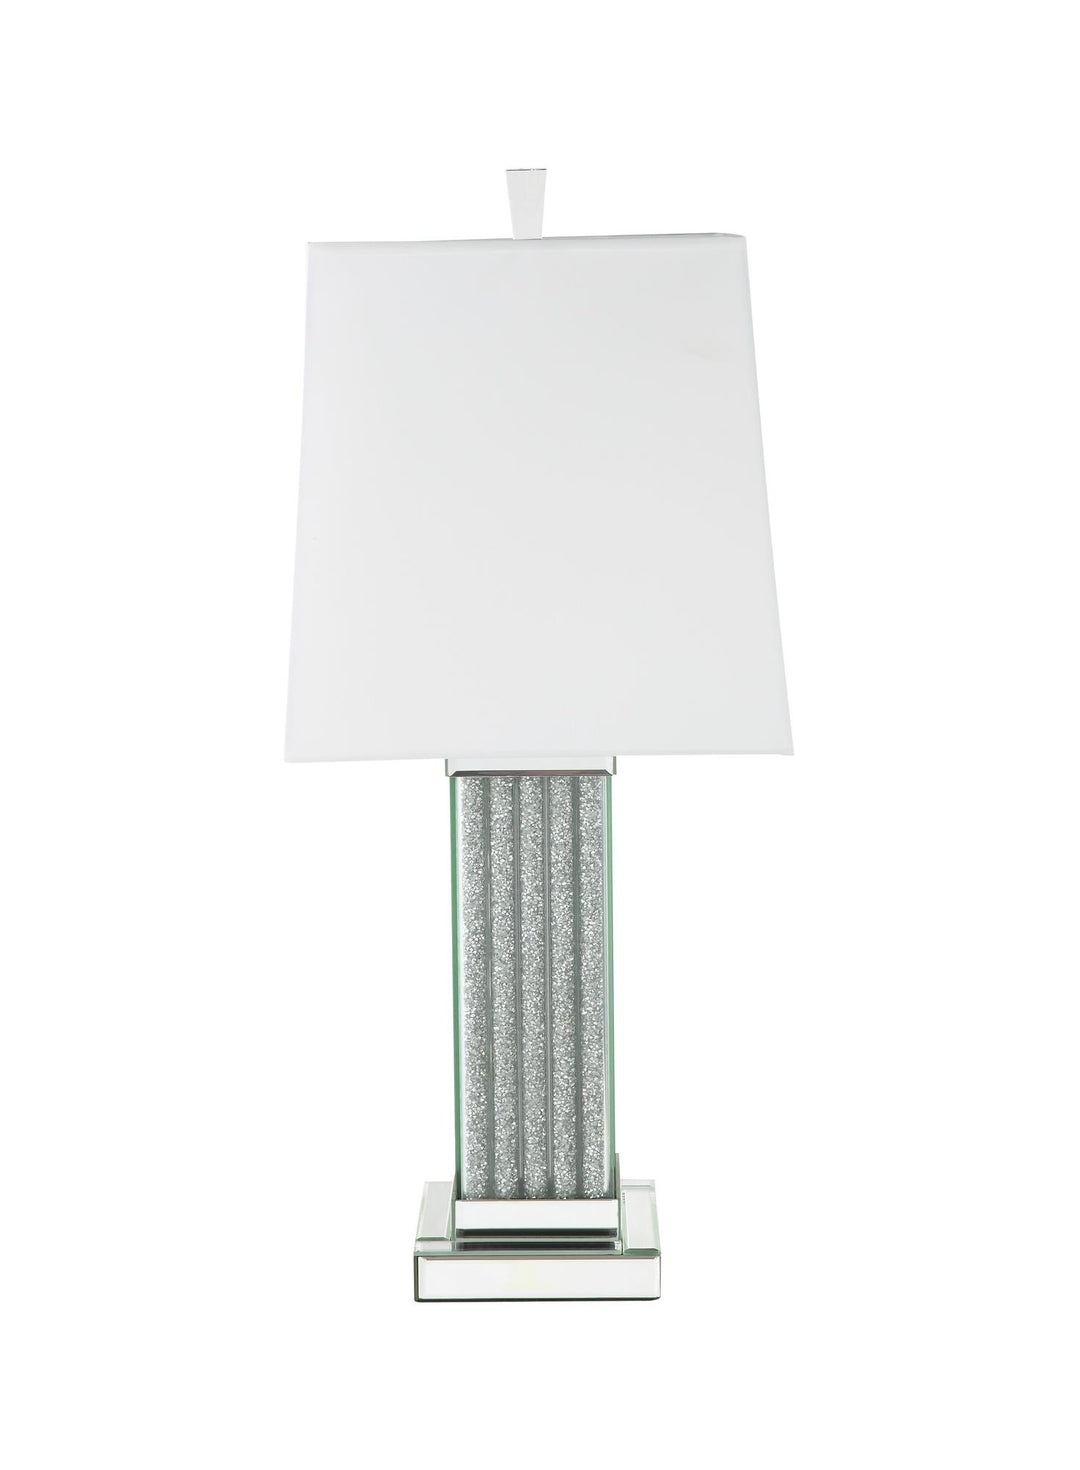 Noralie Glam Table Lamp with Vertical Faux Crystal Inlay Base - Chrome